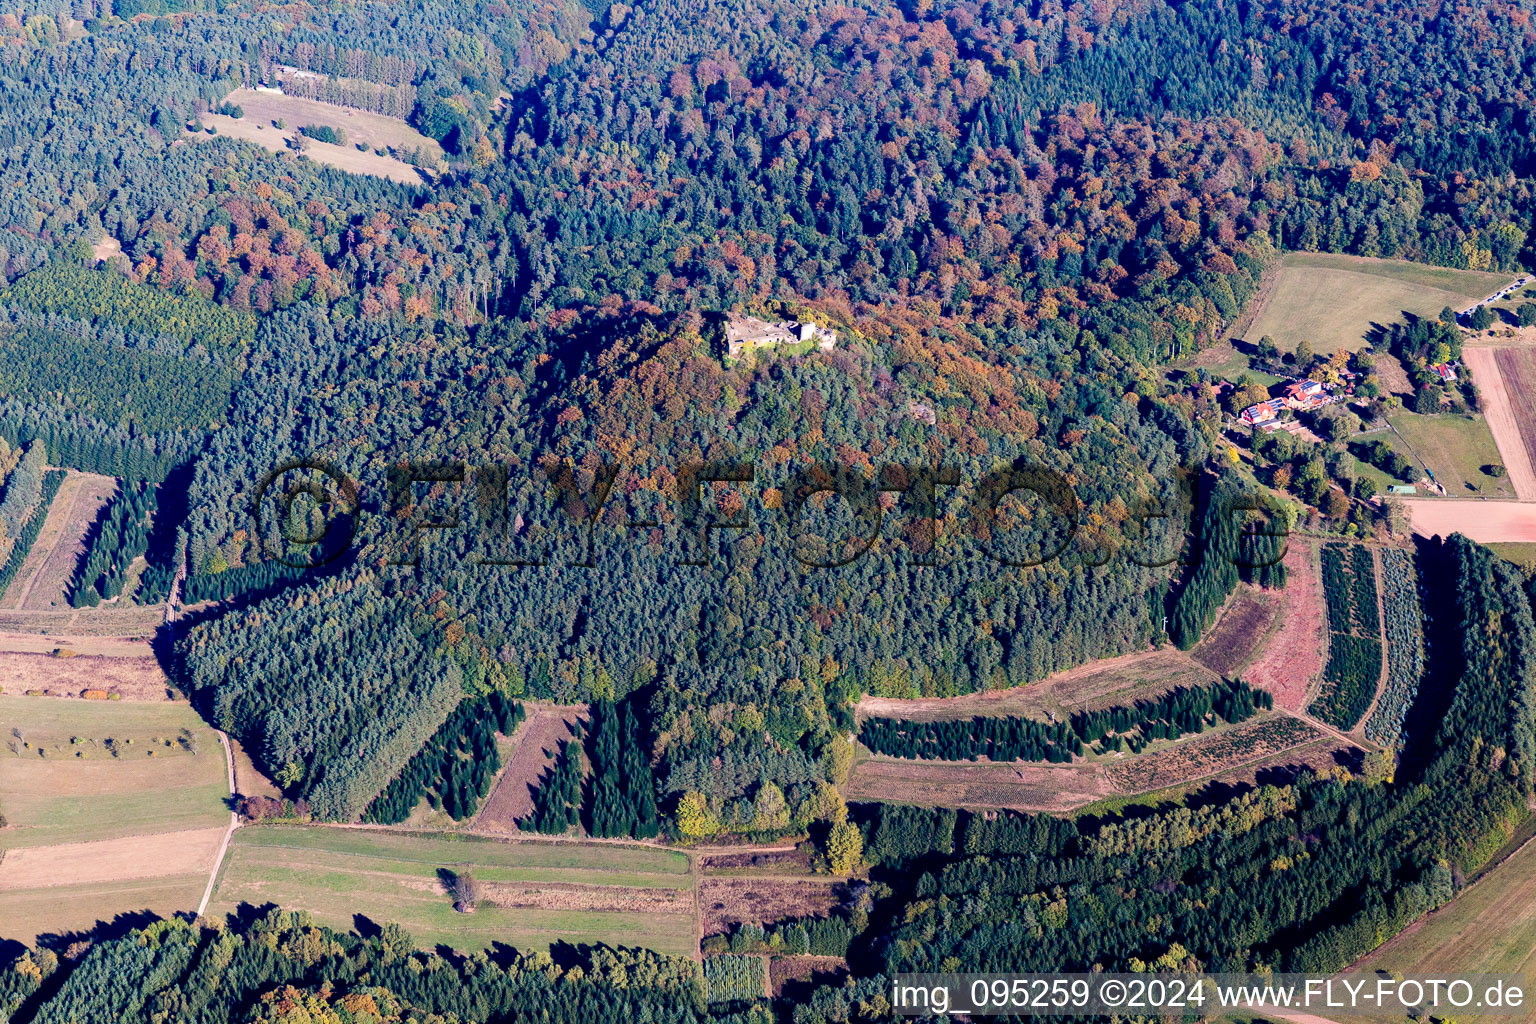 Aerial view of Lindenfels ruins in Vorderweidenthal in the state Rhineland-Palatinate, Germany